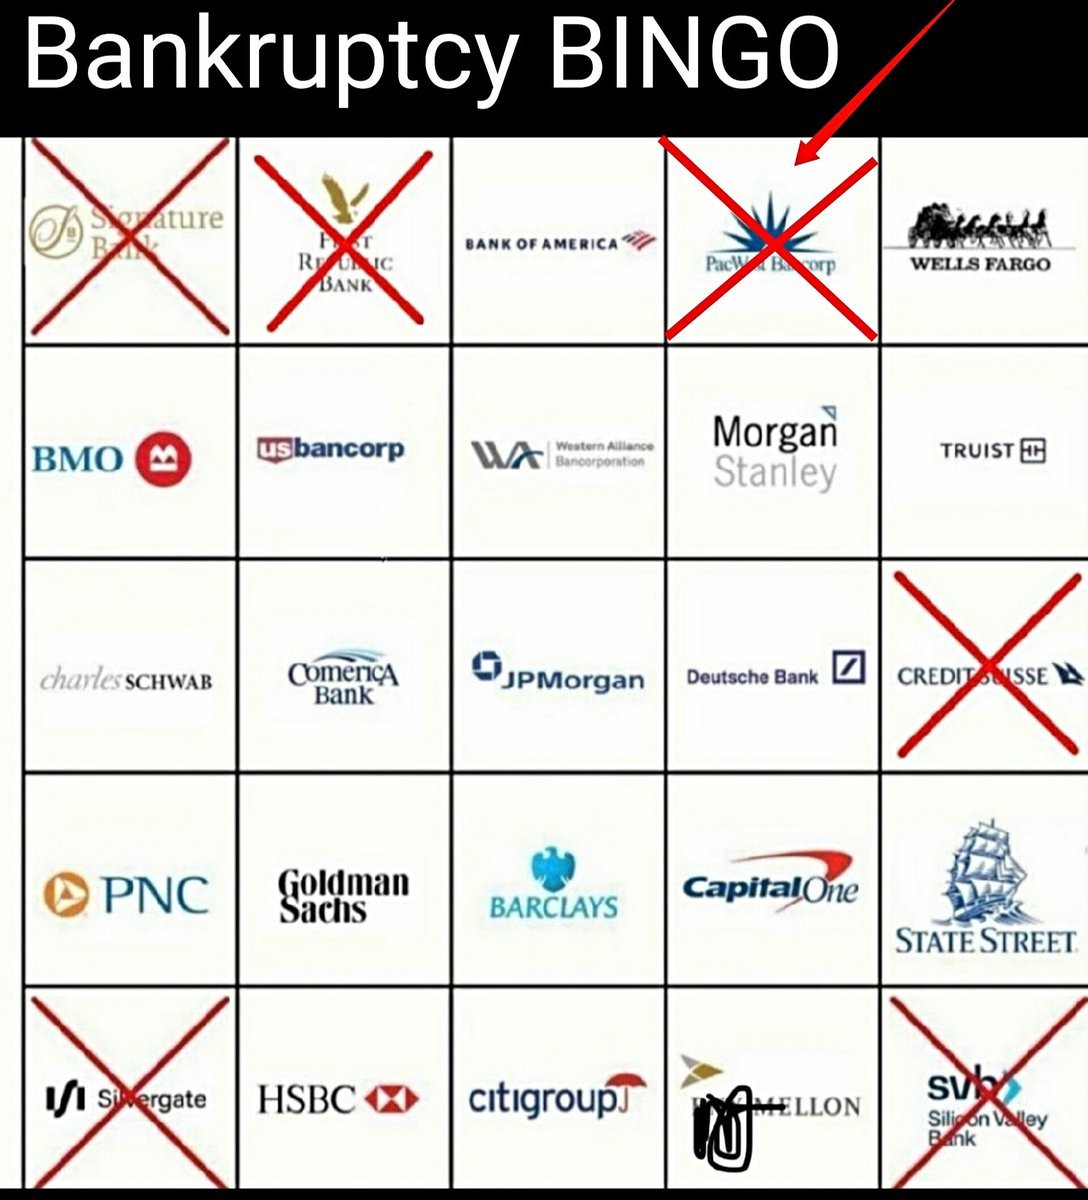 Which #Bank is next? #Bankruptcy #BingoPlus 

#signature #FirstRepublicBank #PacWest #CreditSuisse #Silvergate #SVBBank